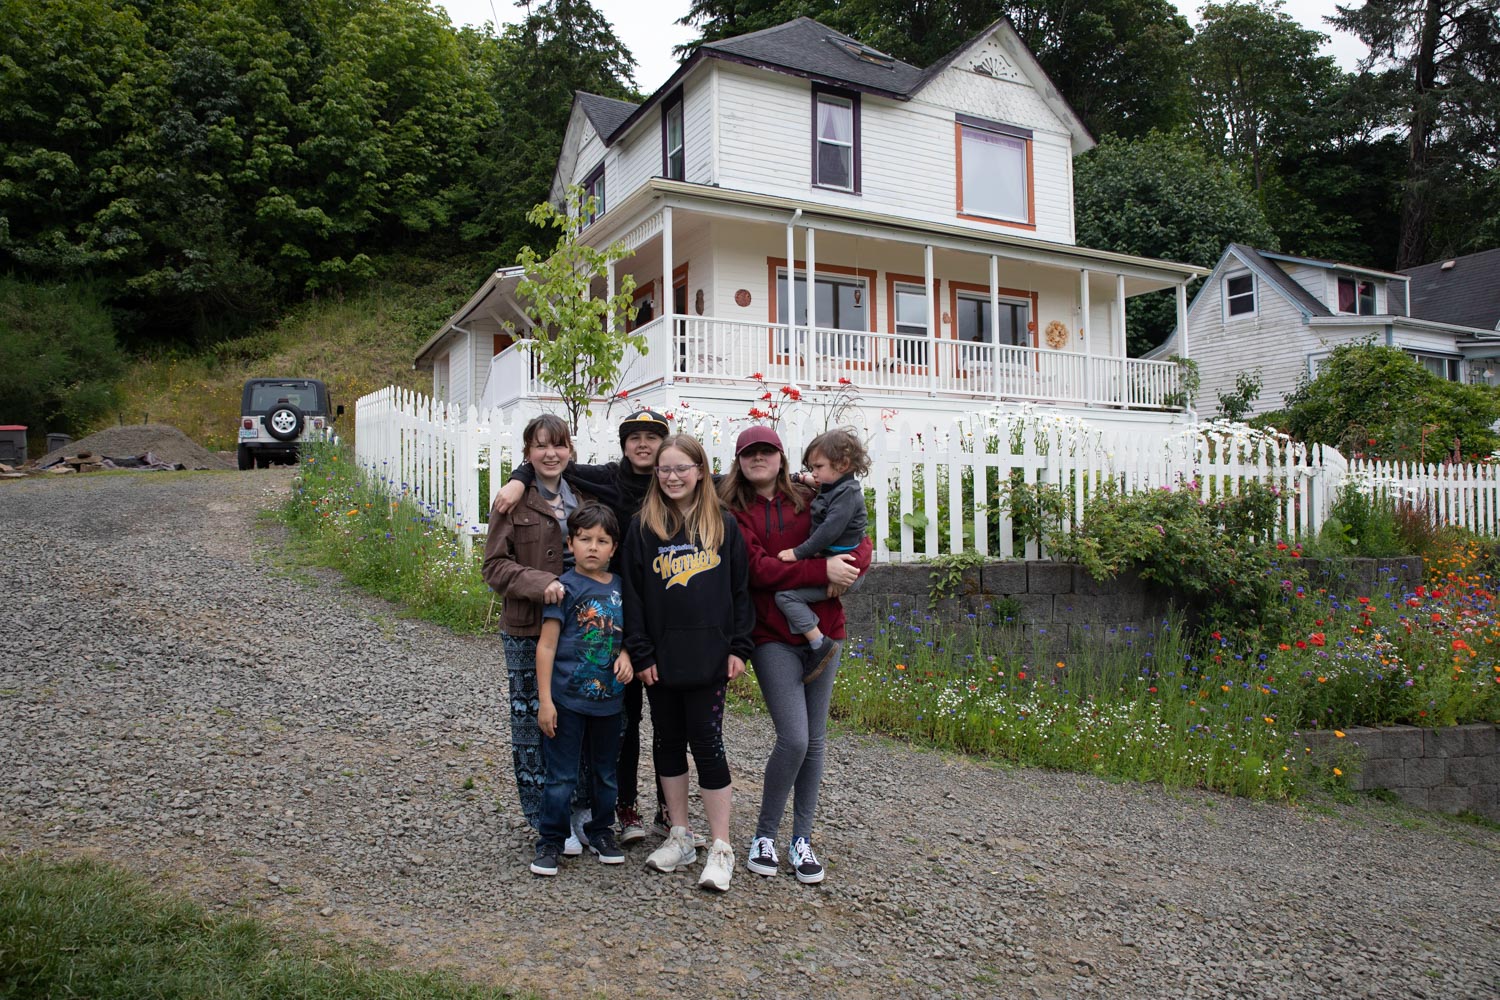 Famed 'Goonies' House for Sale for $1.7 Million in Oregon State